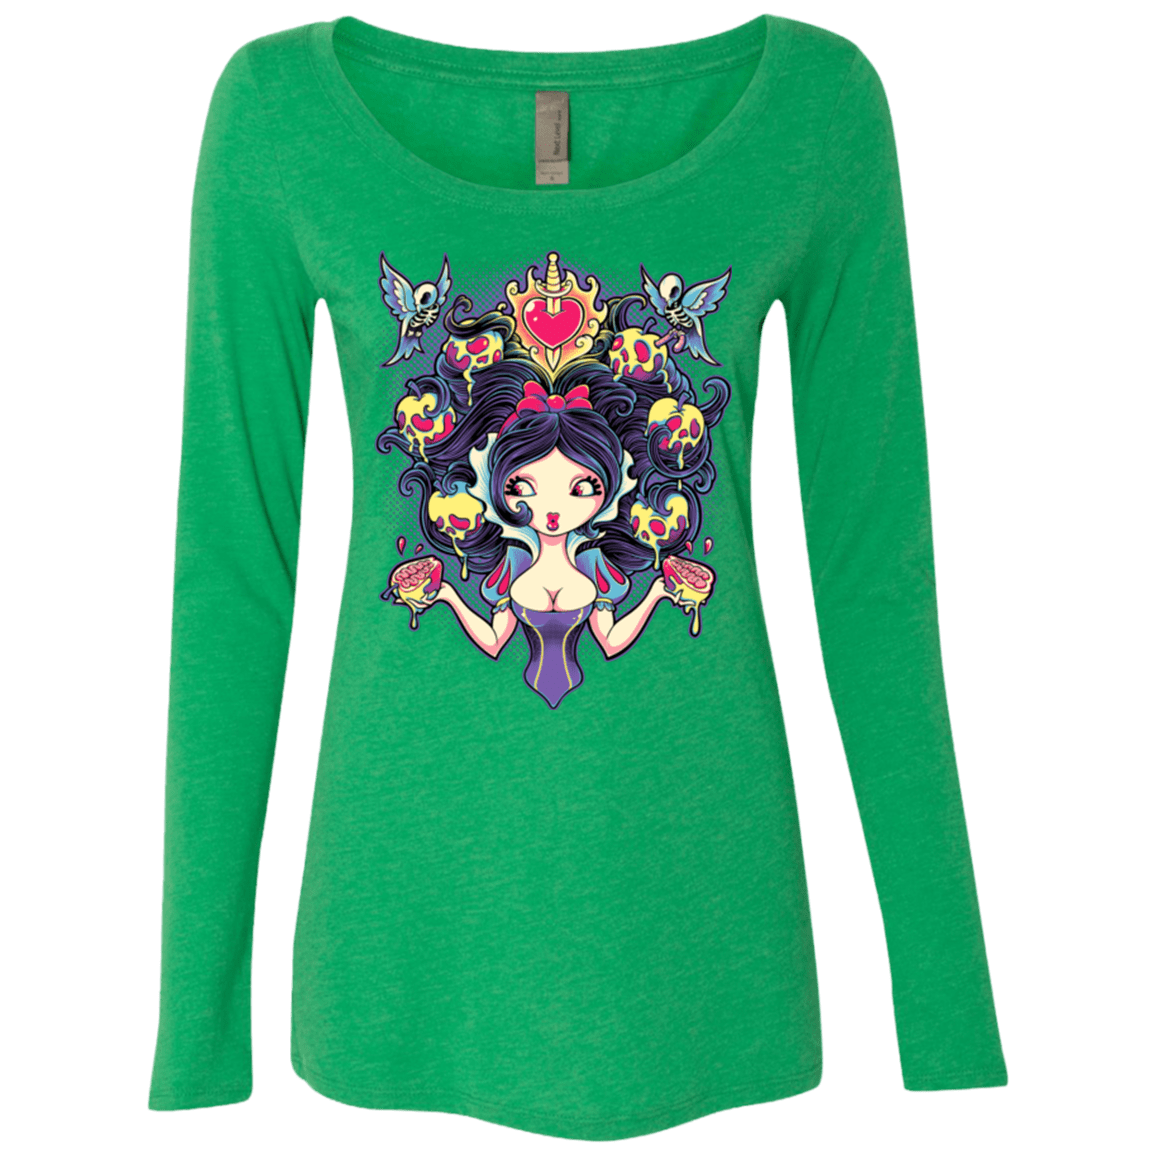 T-Shirts Envy / Small Poisoned Mind Women's Triblend Long Sleeve Shirt